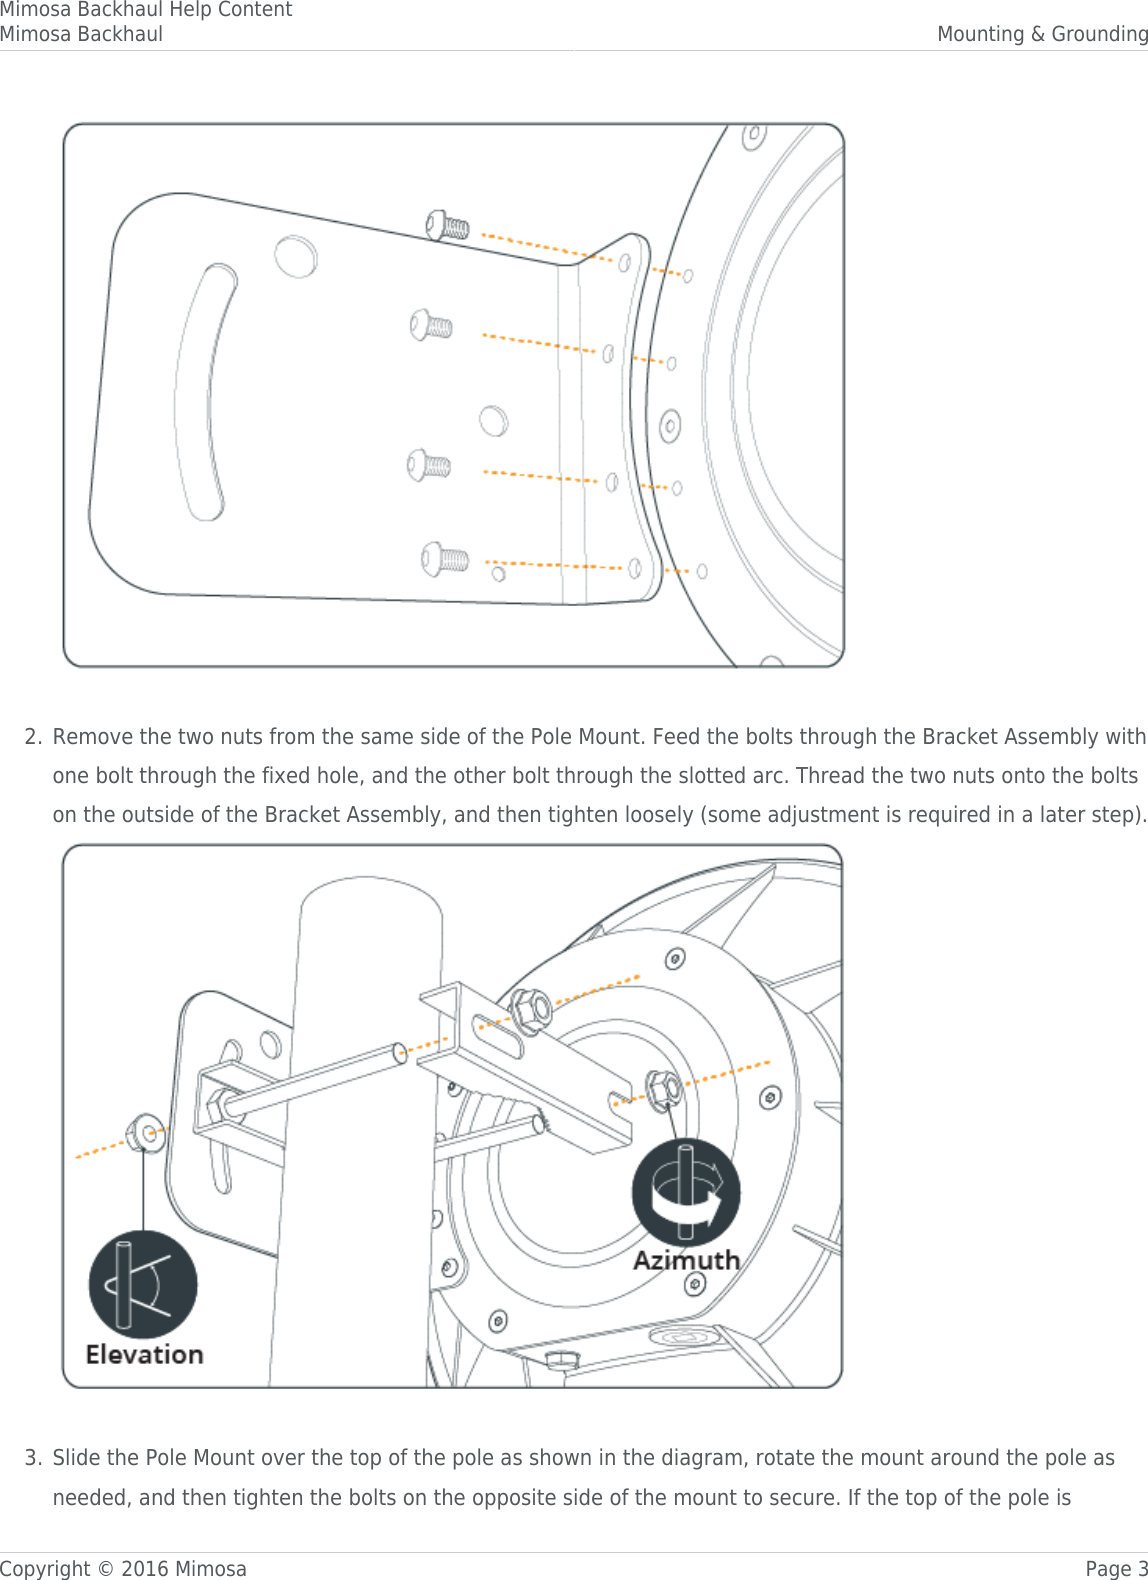 Mimosa Backhaul Help ContentMimosa Backhaul Mounting &amp; GroundingCopyright © 2016 Mimosa Page 3 Remove the two nuts from the same side of the Pole Mount. Feed the bolts through the Bracket Assembly with2.one bolt through the fixed hole, and the other bolt through the slotted arc. Thread the two nuts onto the boltson the outside of the Bracket Assembly, and then tighten loosely (some adjustment is required in a later step). Slide the Pole Mount over the top of the pole as shown in the diagram, rotate the mount around the pole as3.needed, and then tighten the bolts on the opposite side of the mount to secure. If the top of the pole is